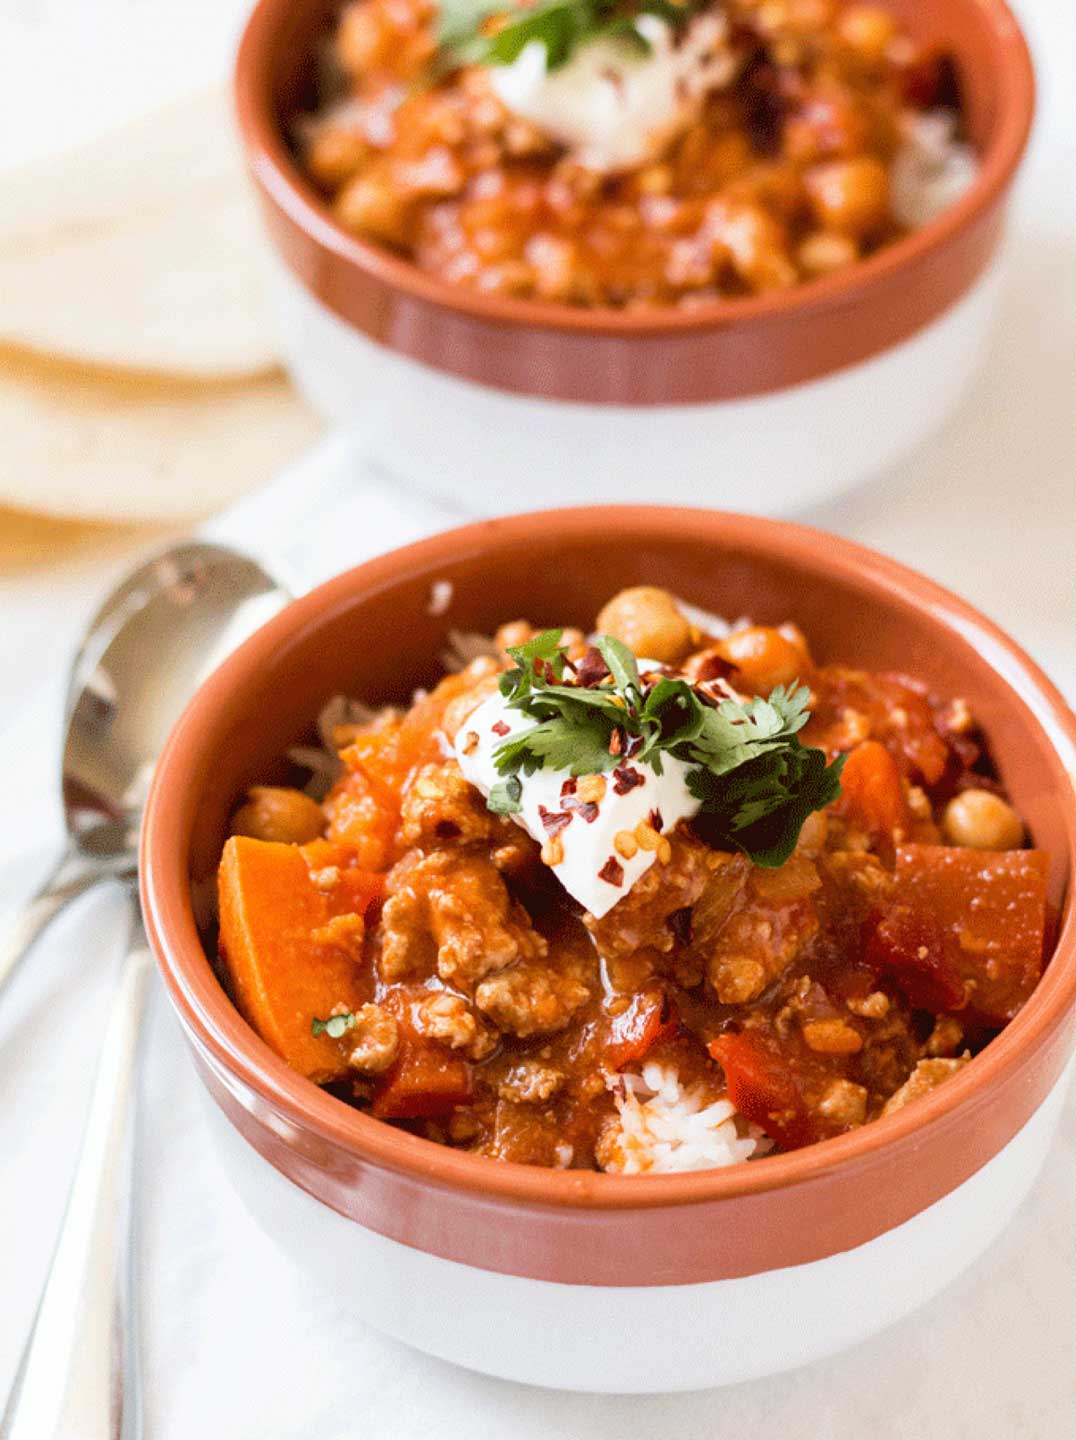 Who wouldn’t love warming up with this Instant Pot Turkey and Sweet Potato Chilli from Donna at Whole Food Bellies?!? We’ve got 16 more easy, healthy and pressure-cooker-fast chili recipes for ya, too!